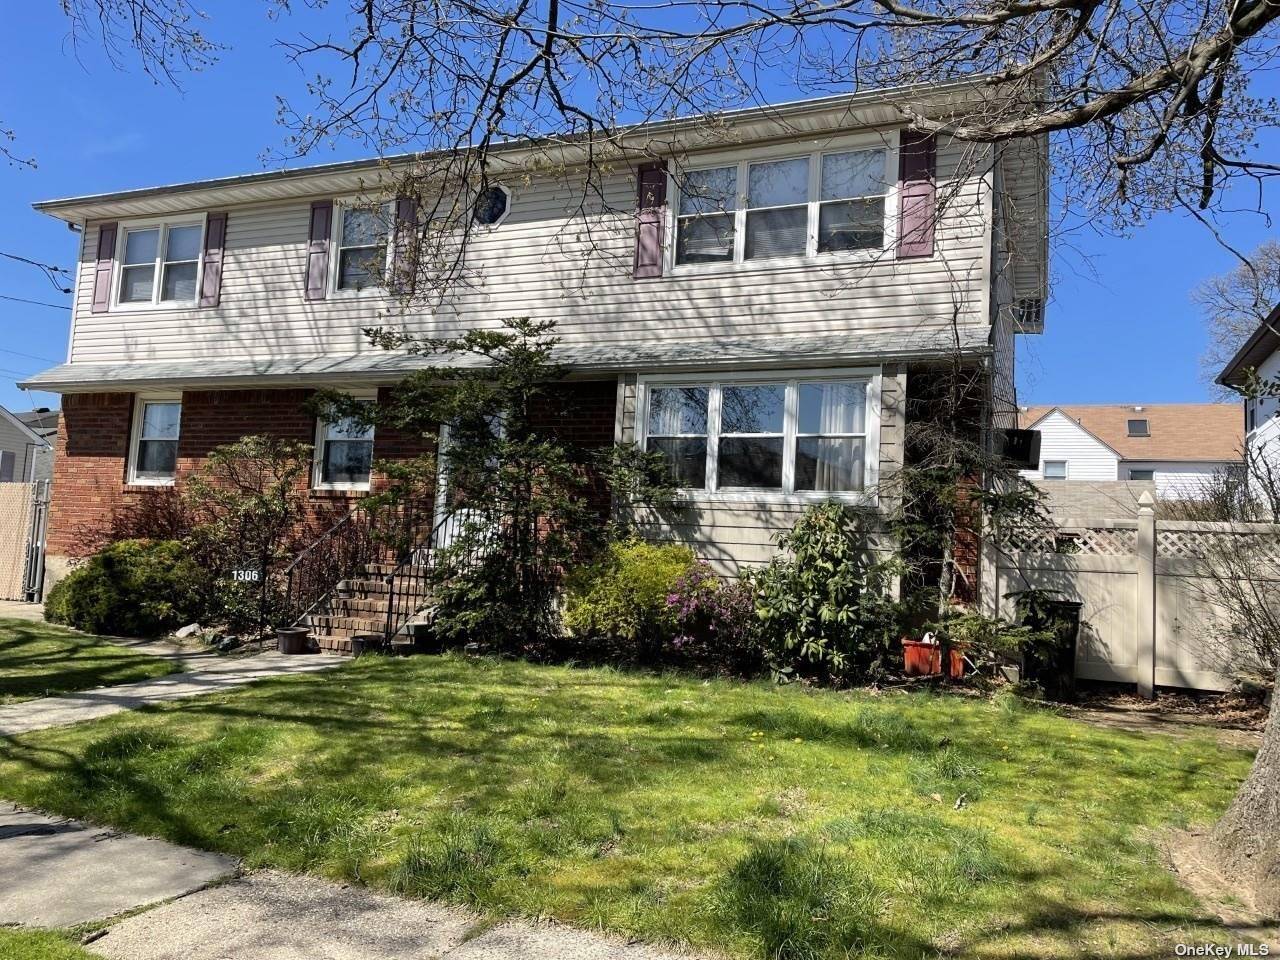 Spacious 13 room duplex colonial home with 4 bedrooms on first floor and 3 bedrooms on 2nd floor.